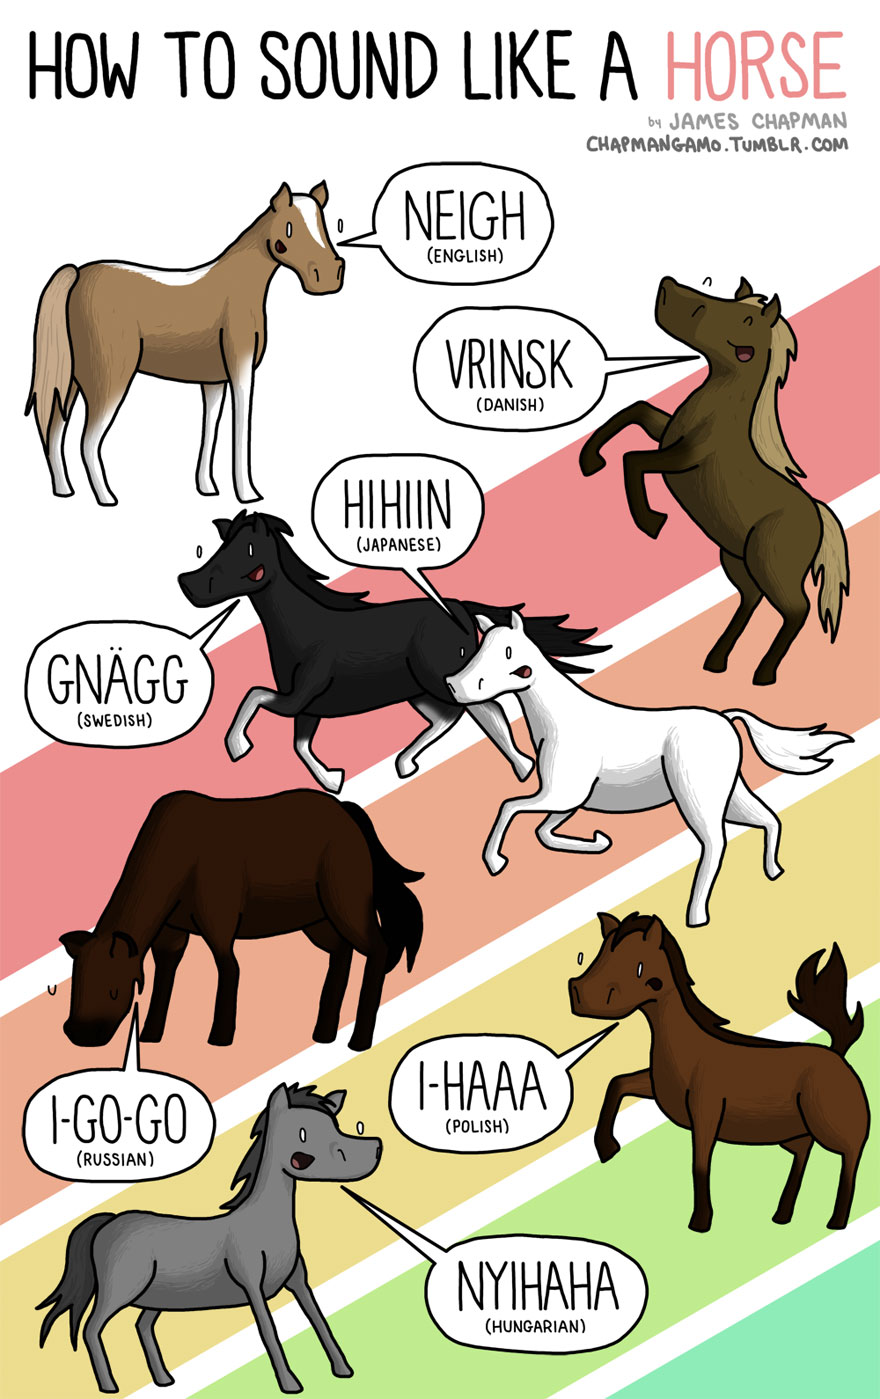 How Do Animals Sound In Different Languages? | Bored Panda